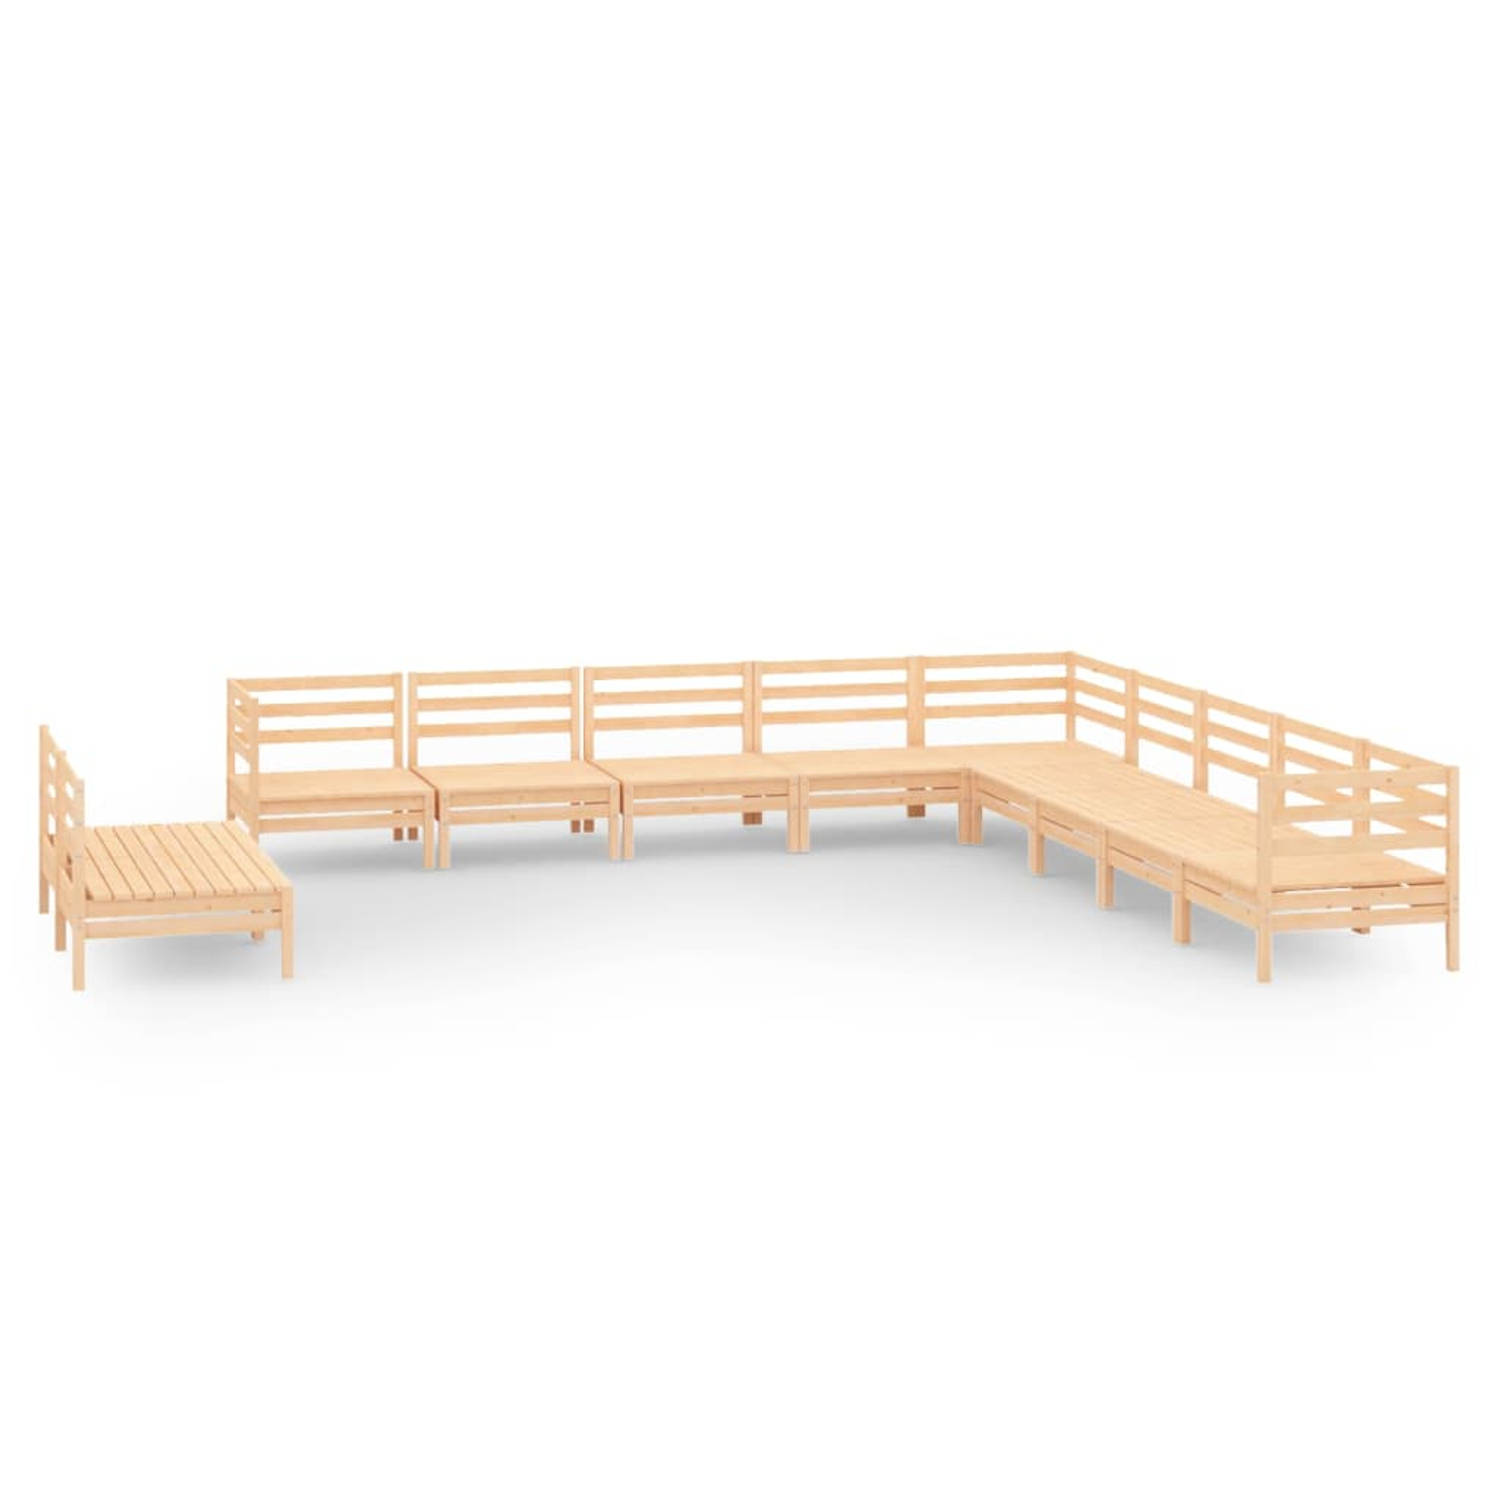 The Living Store Houten Tuinmeubelset - 63.5 x 63.5 x 62.5 cm - Grenenhout - Modulair